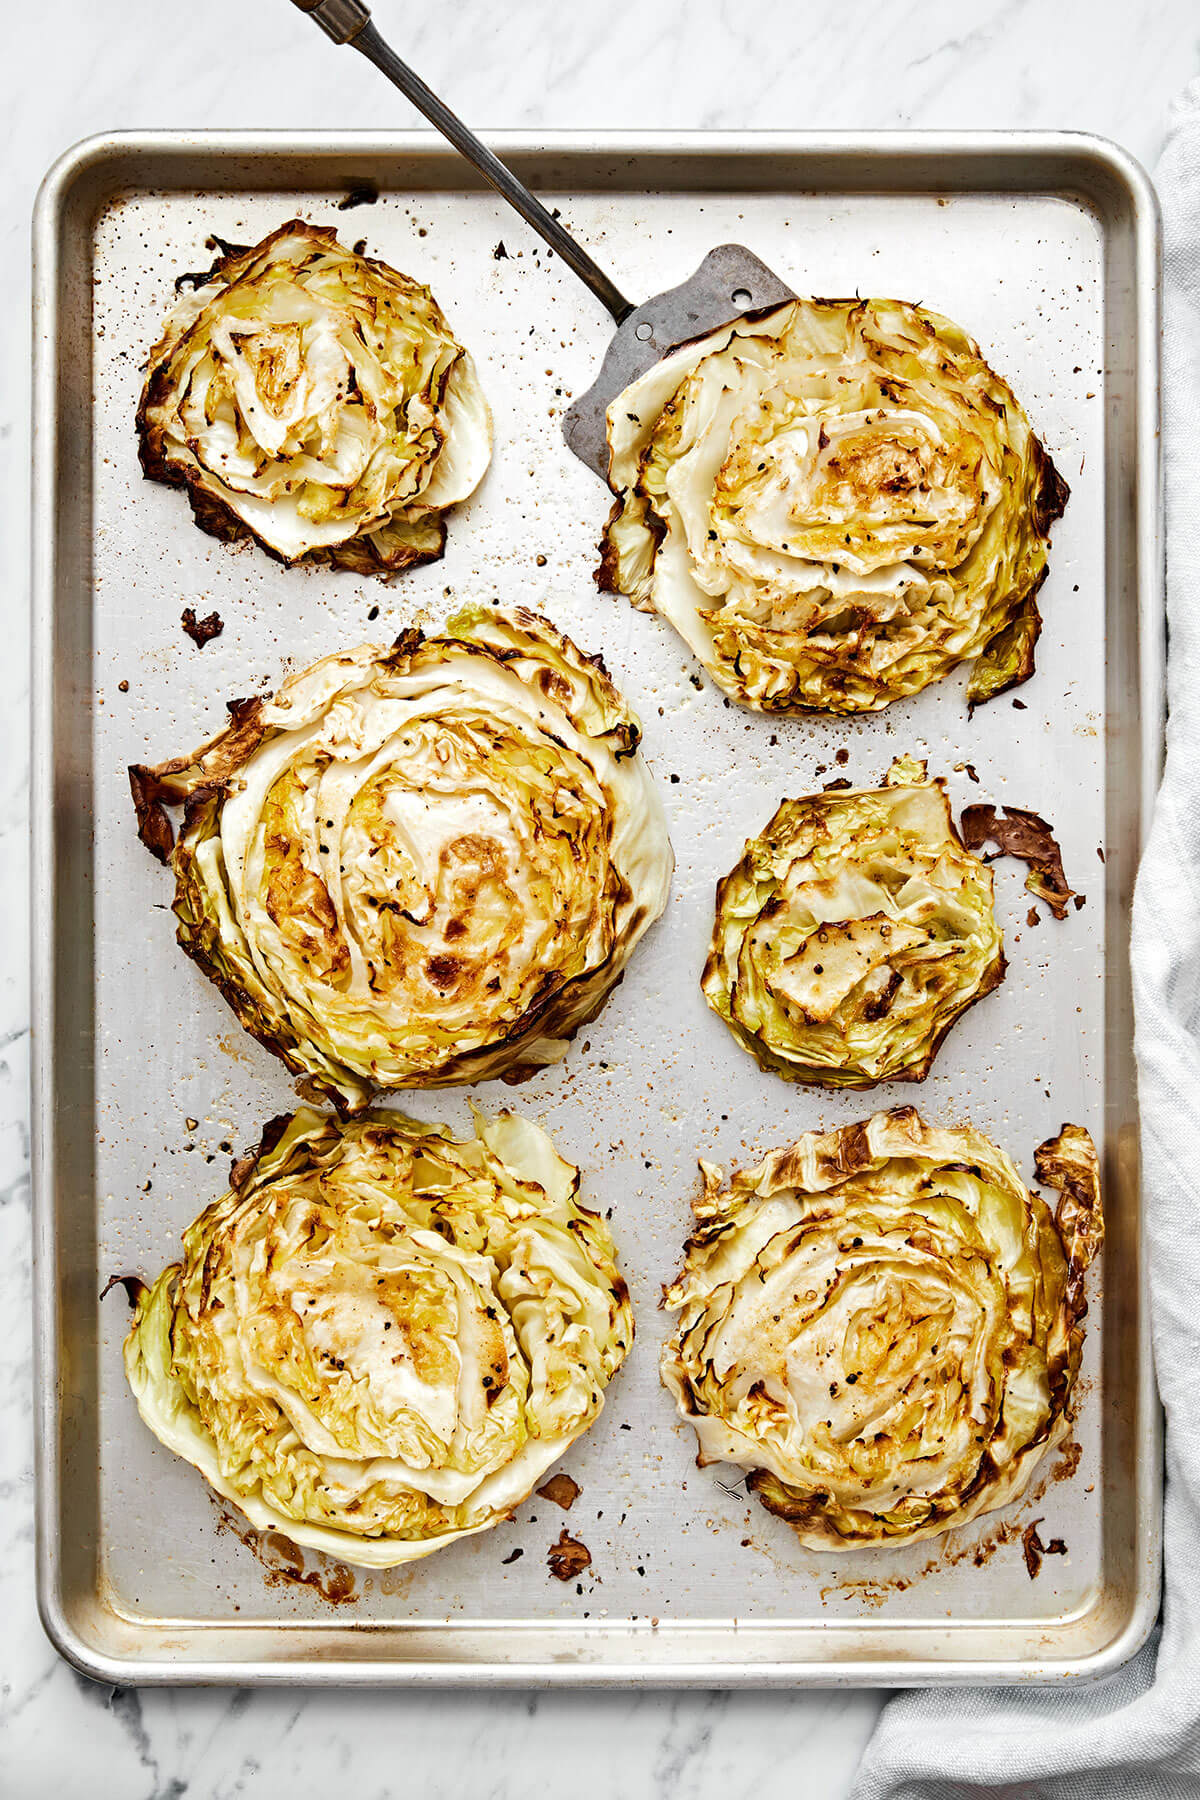 Cabbage steaks on a sheet pan